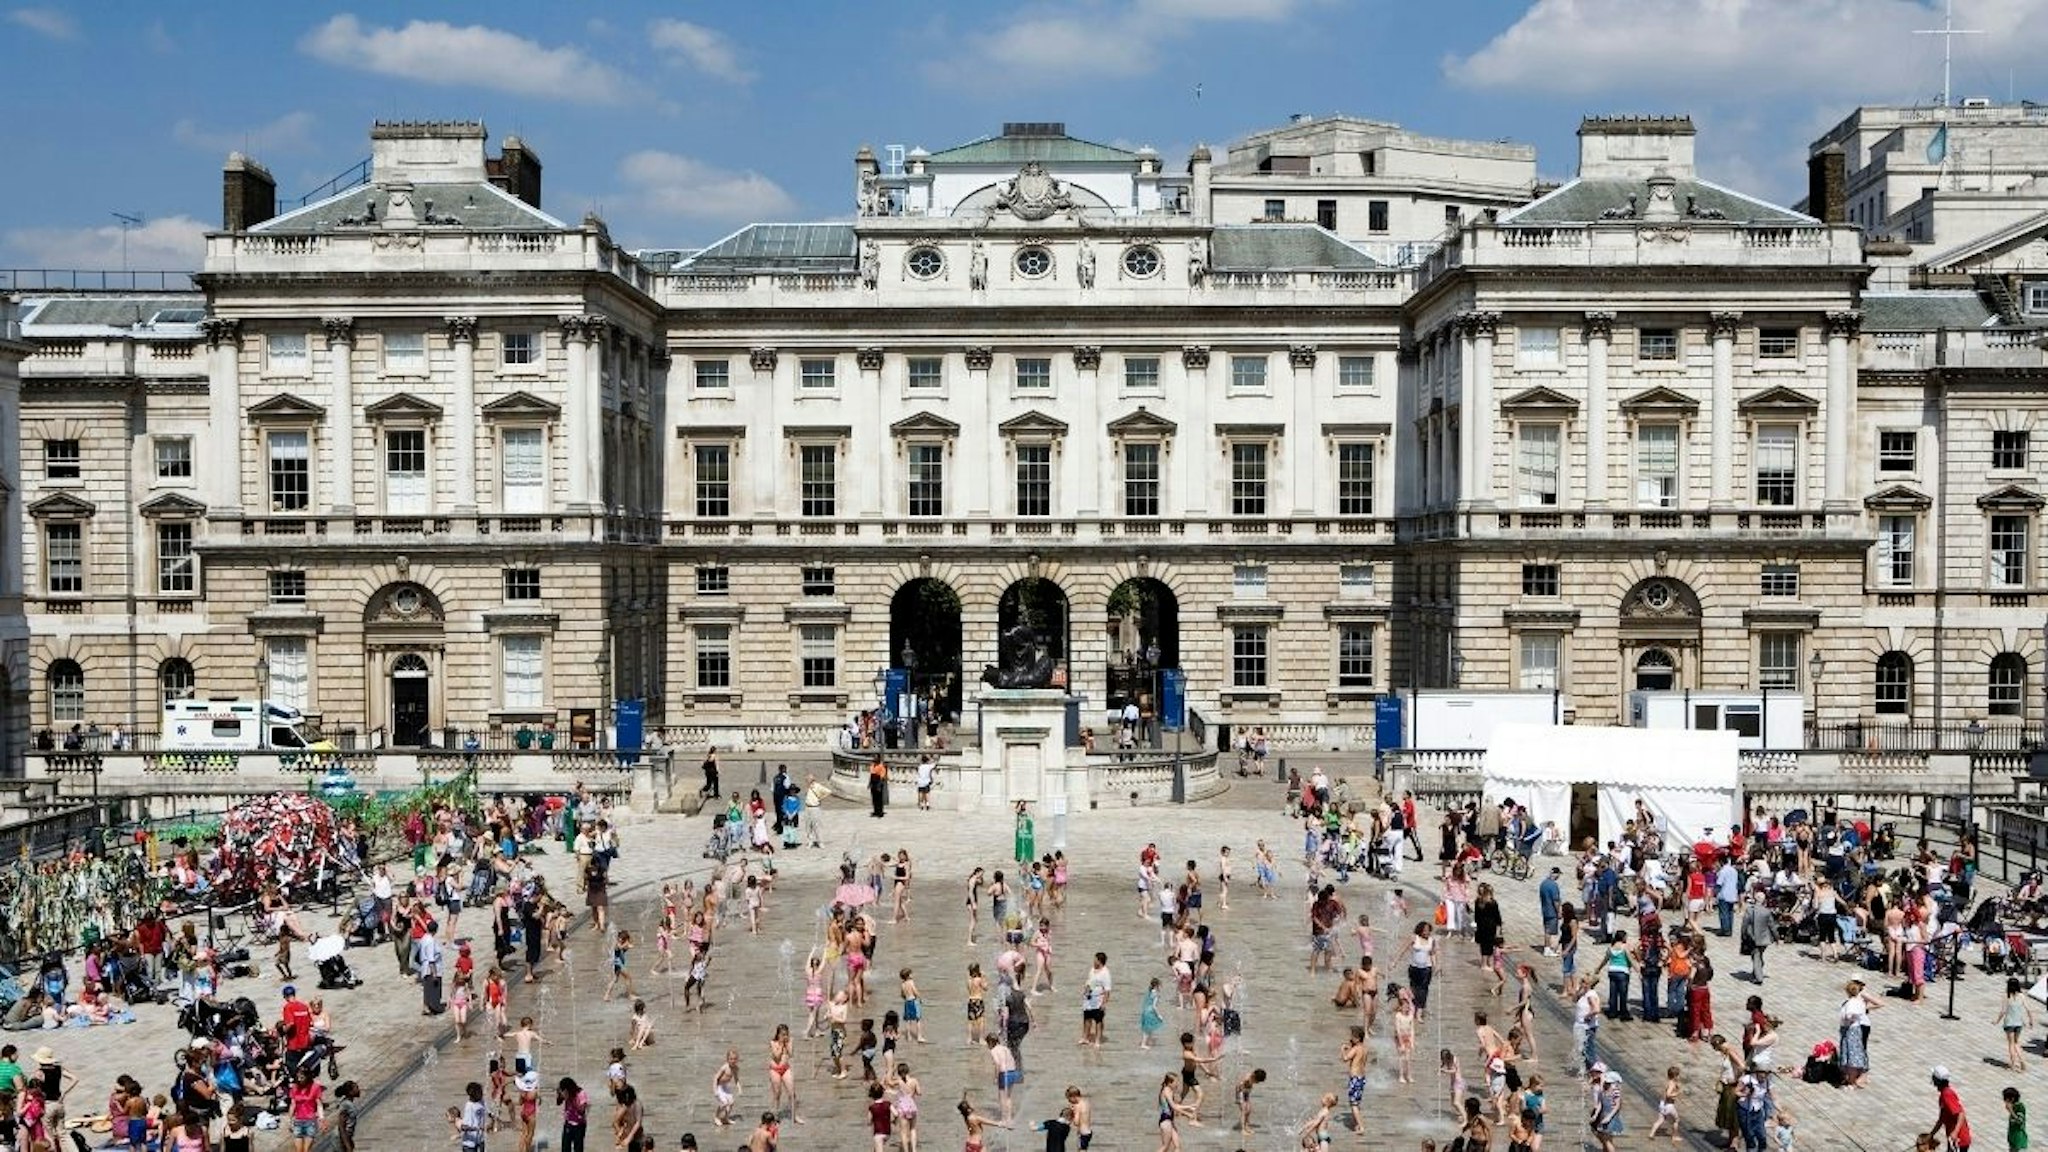 Children play amidst the dancing fountains of the Edmond J. Safra Fountain Court in the Somerset House courtyard.